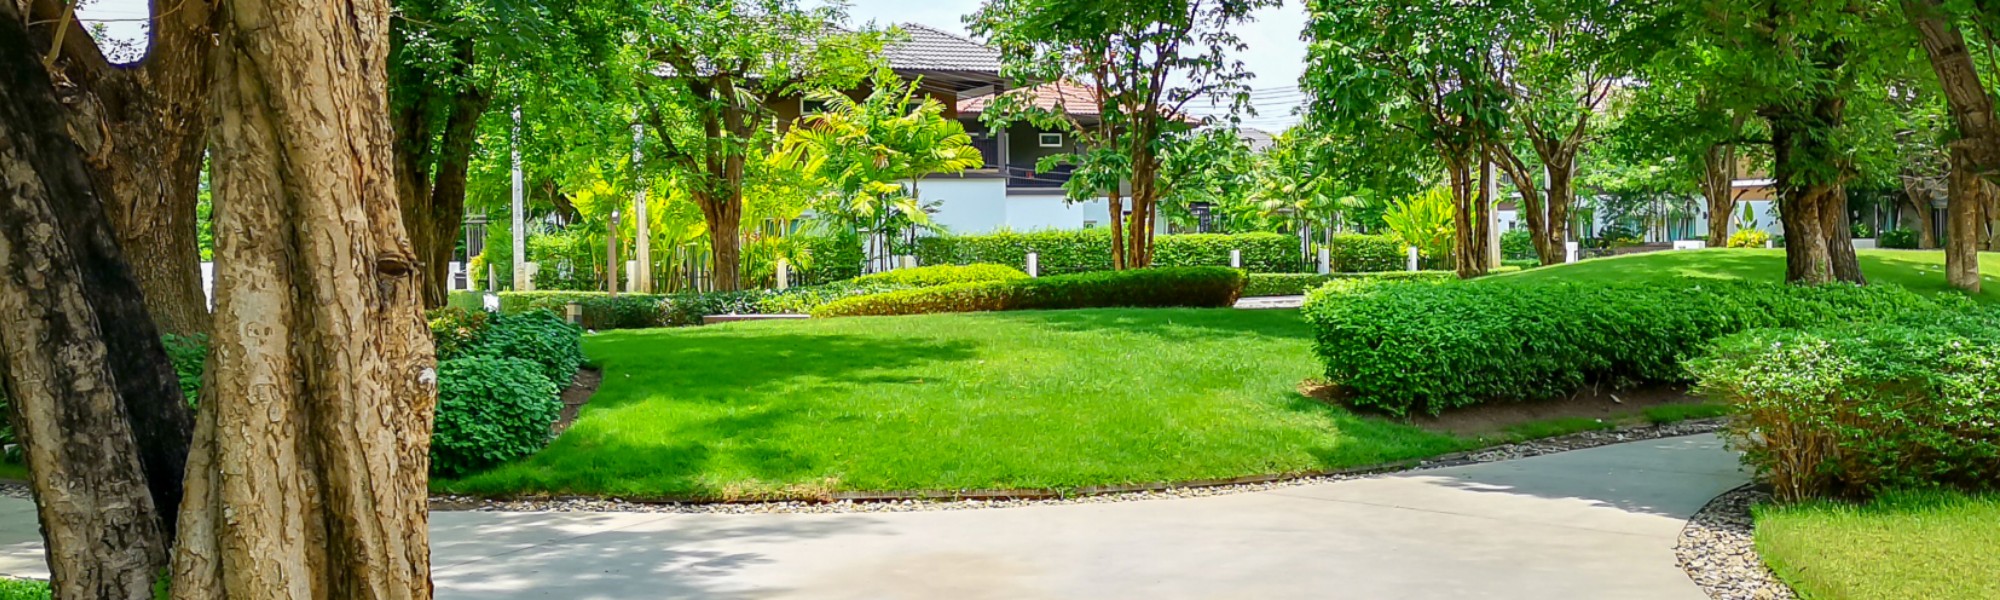 Complete Landscaping Service Linkedin, Commercial Landscaping Services Baltimore Md